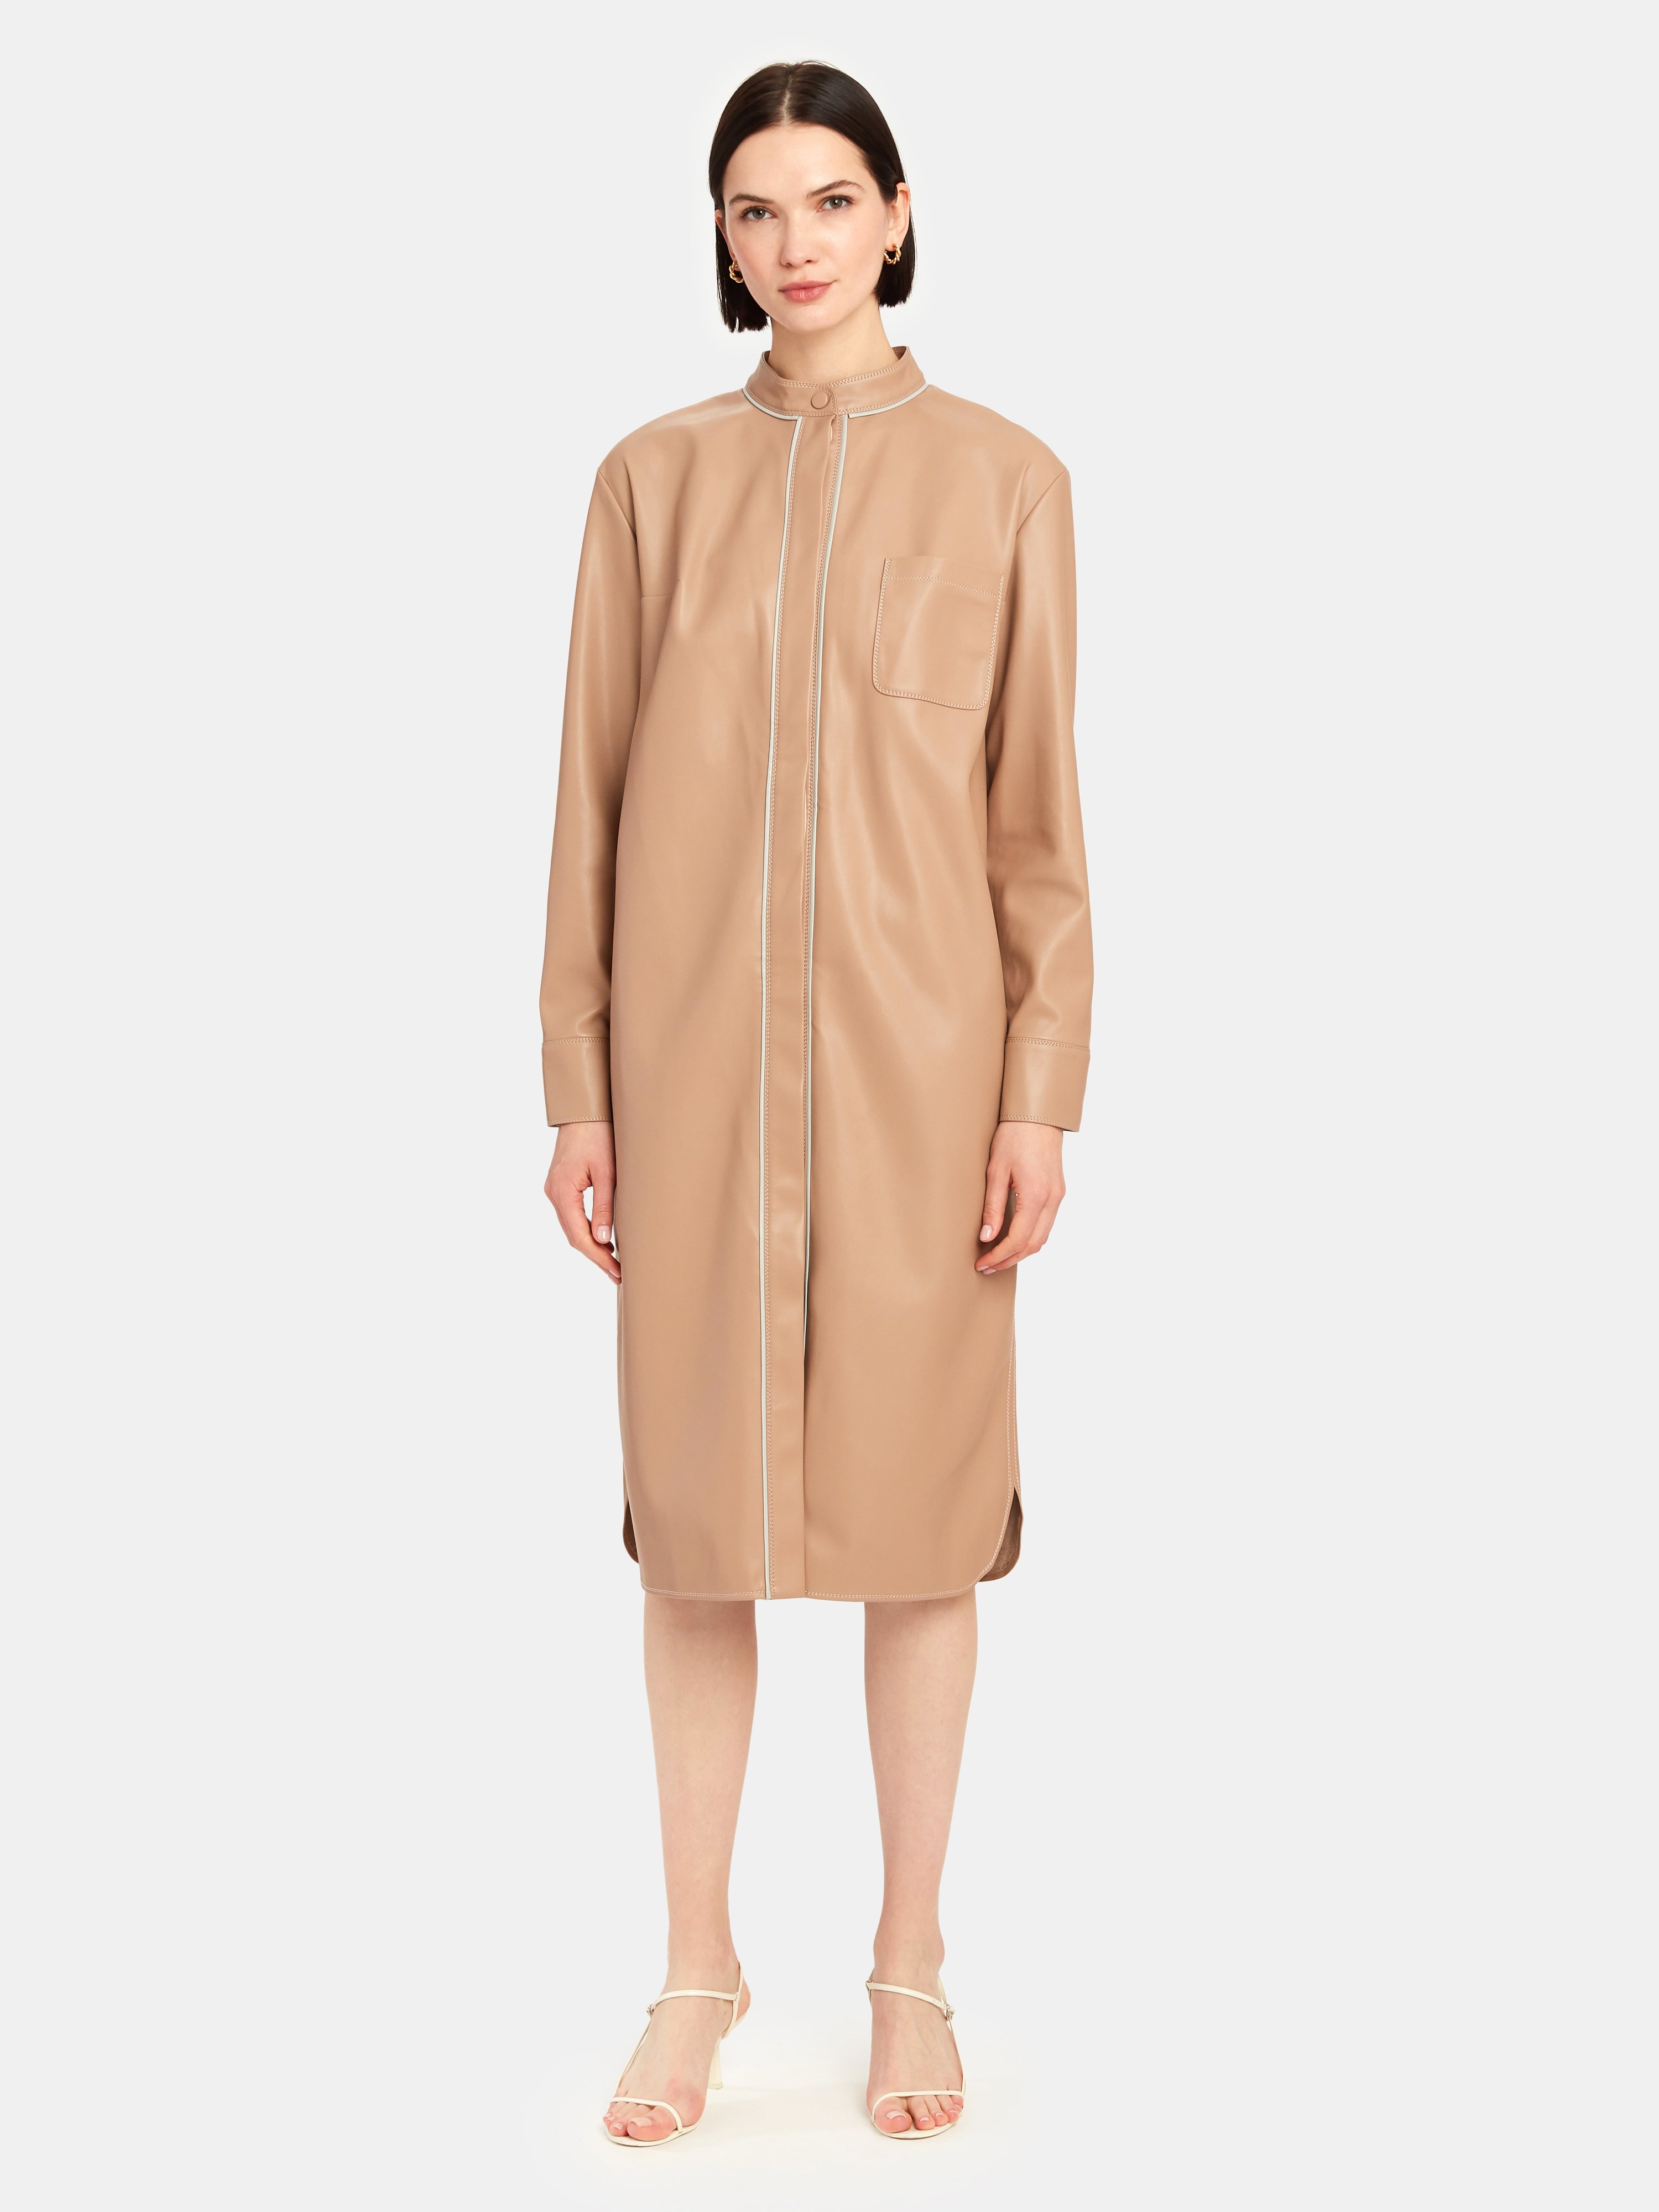 Olenich Contrasting Long Shirt In Milky Cocoa